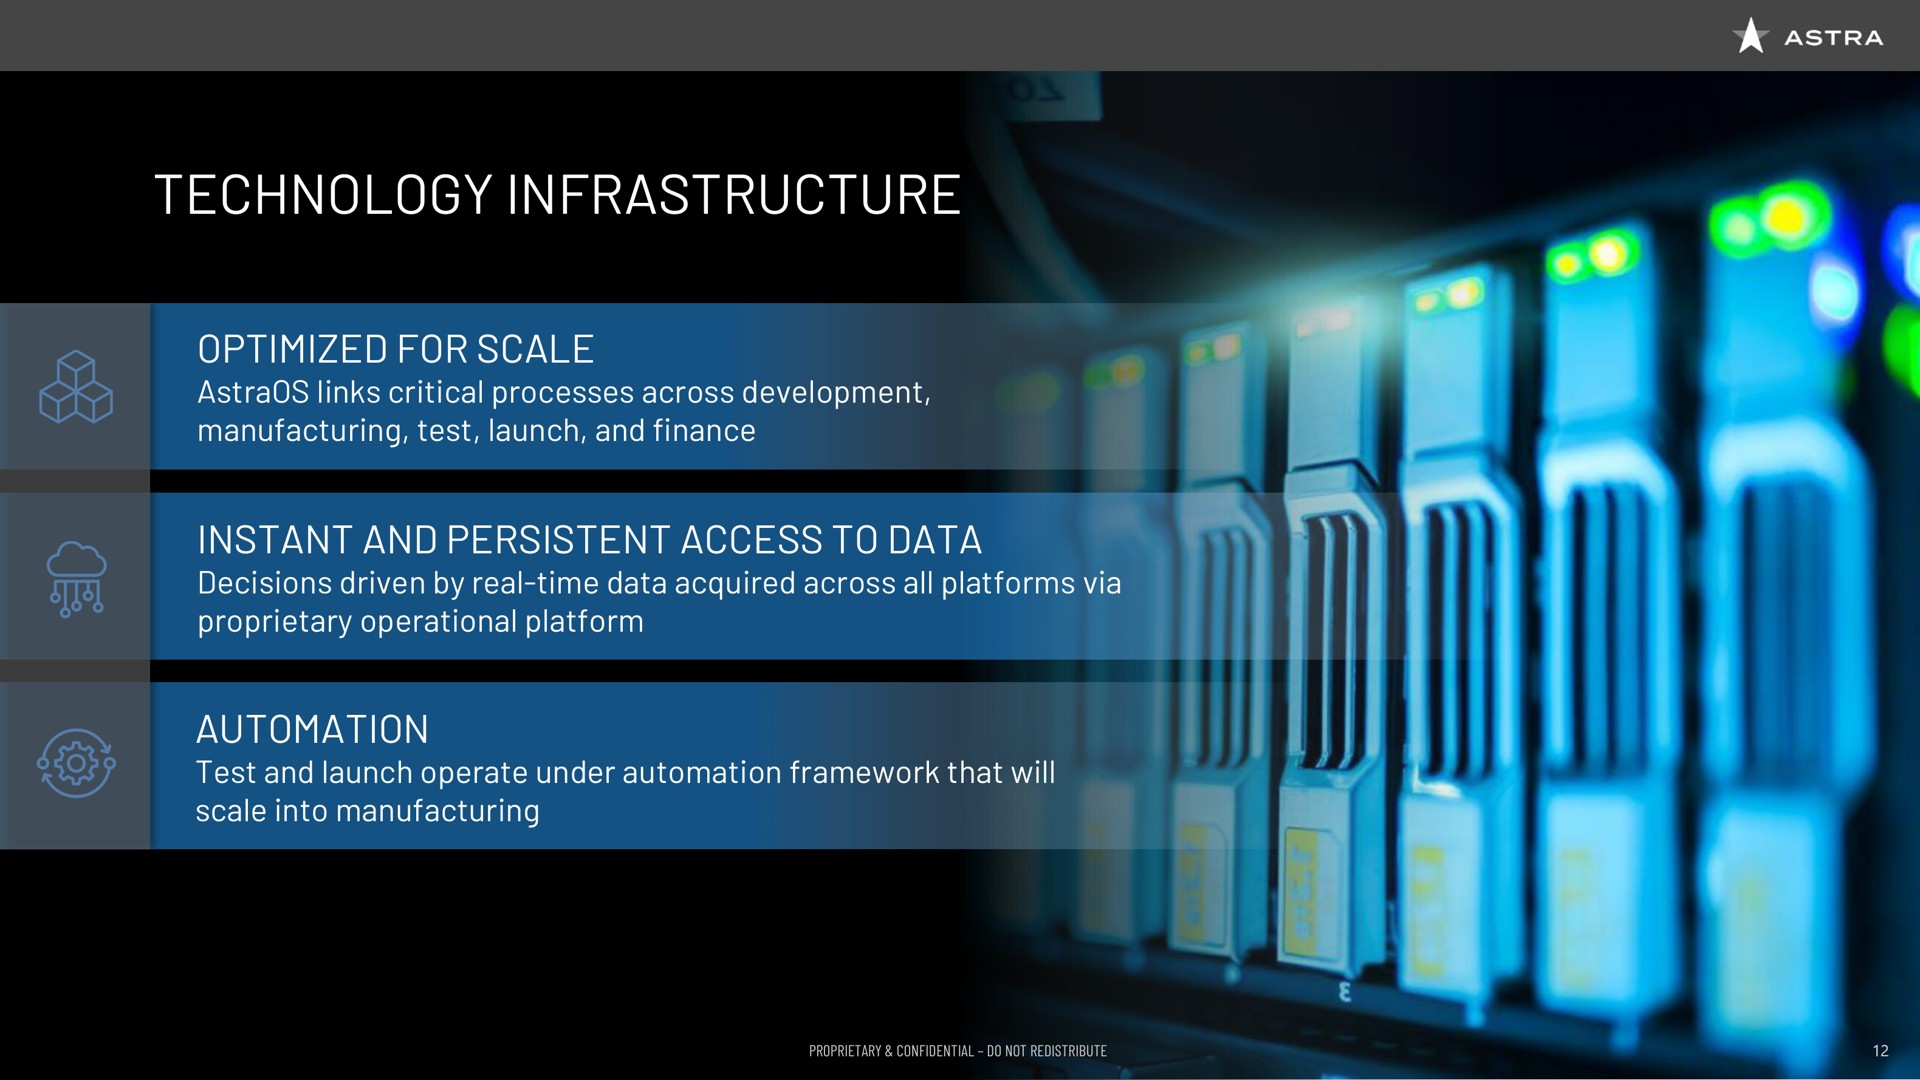 technology infrastructure optimized for scale links critical processes across development manufacturing test launch and finance instant and persistent access to data decisions driven by real time data acquired across all platforms via proprietary operational platform test and launch operate under framework that will scale into manufacturing a | Astra